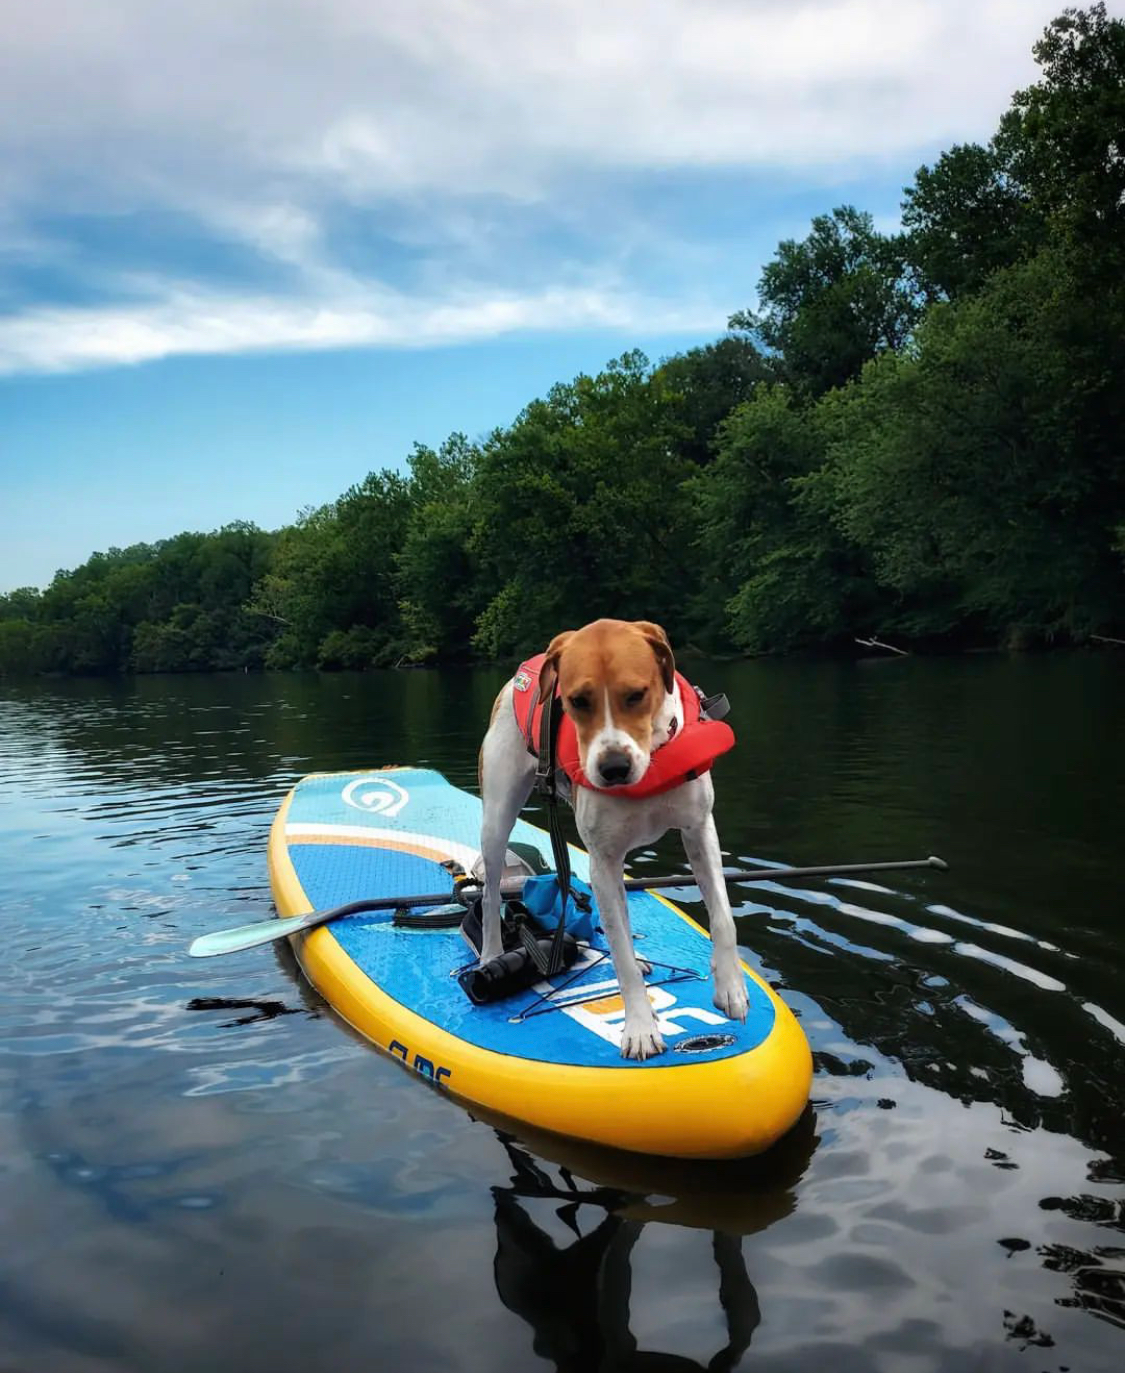 full deck pad helps when the dog jumps on the stand up paddle board